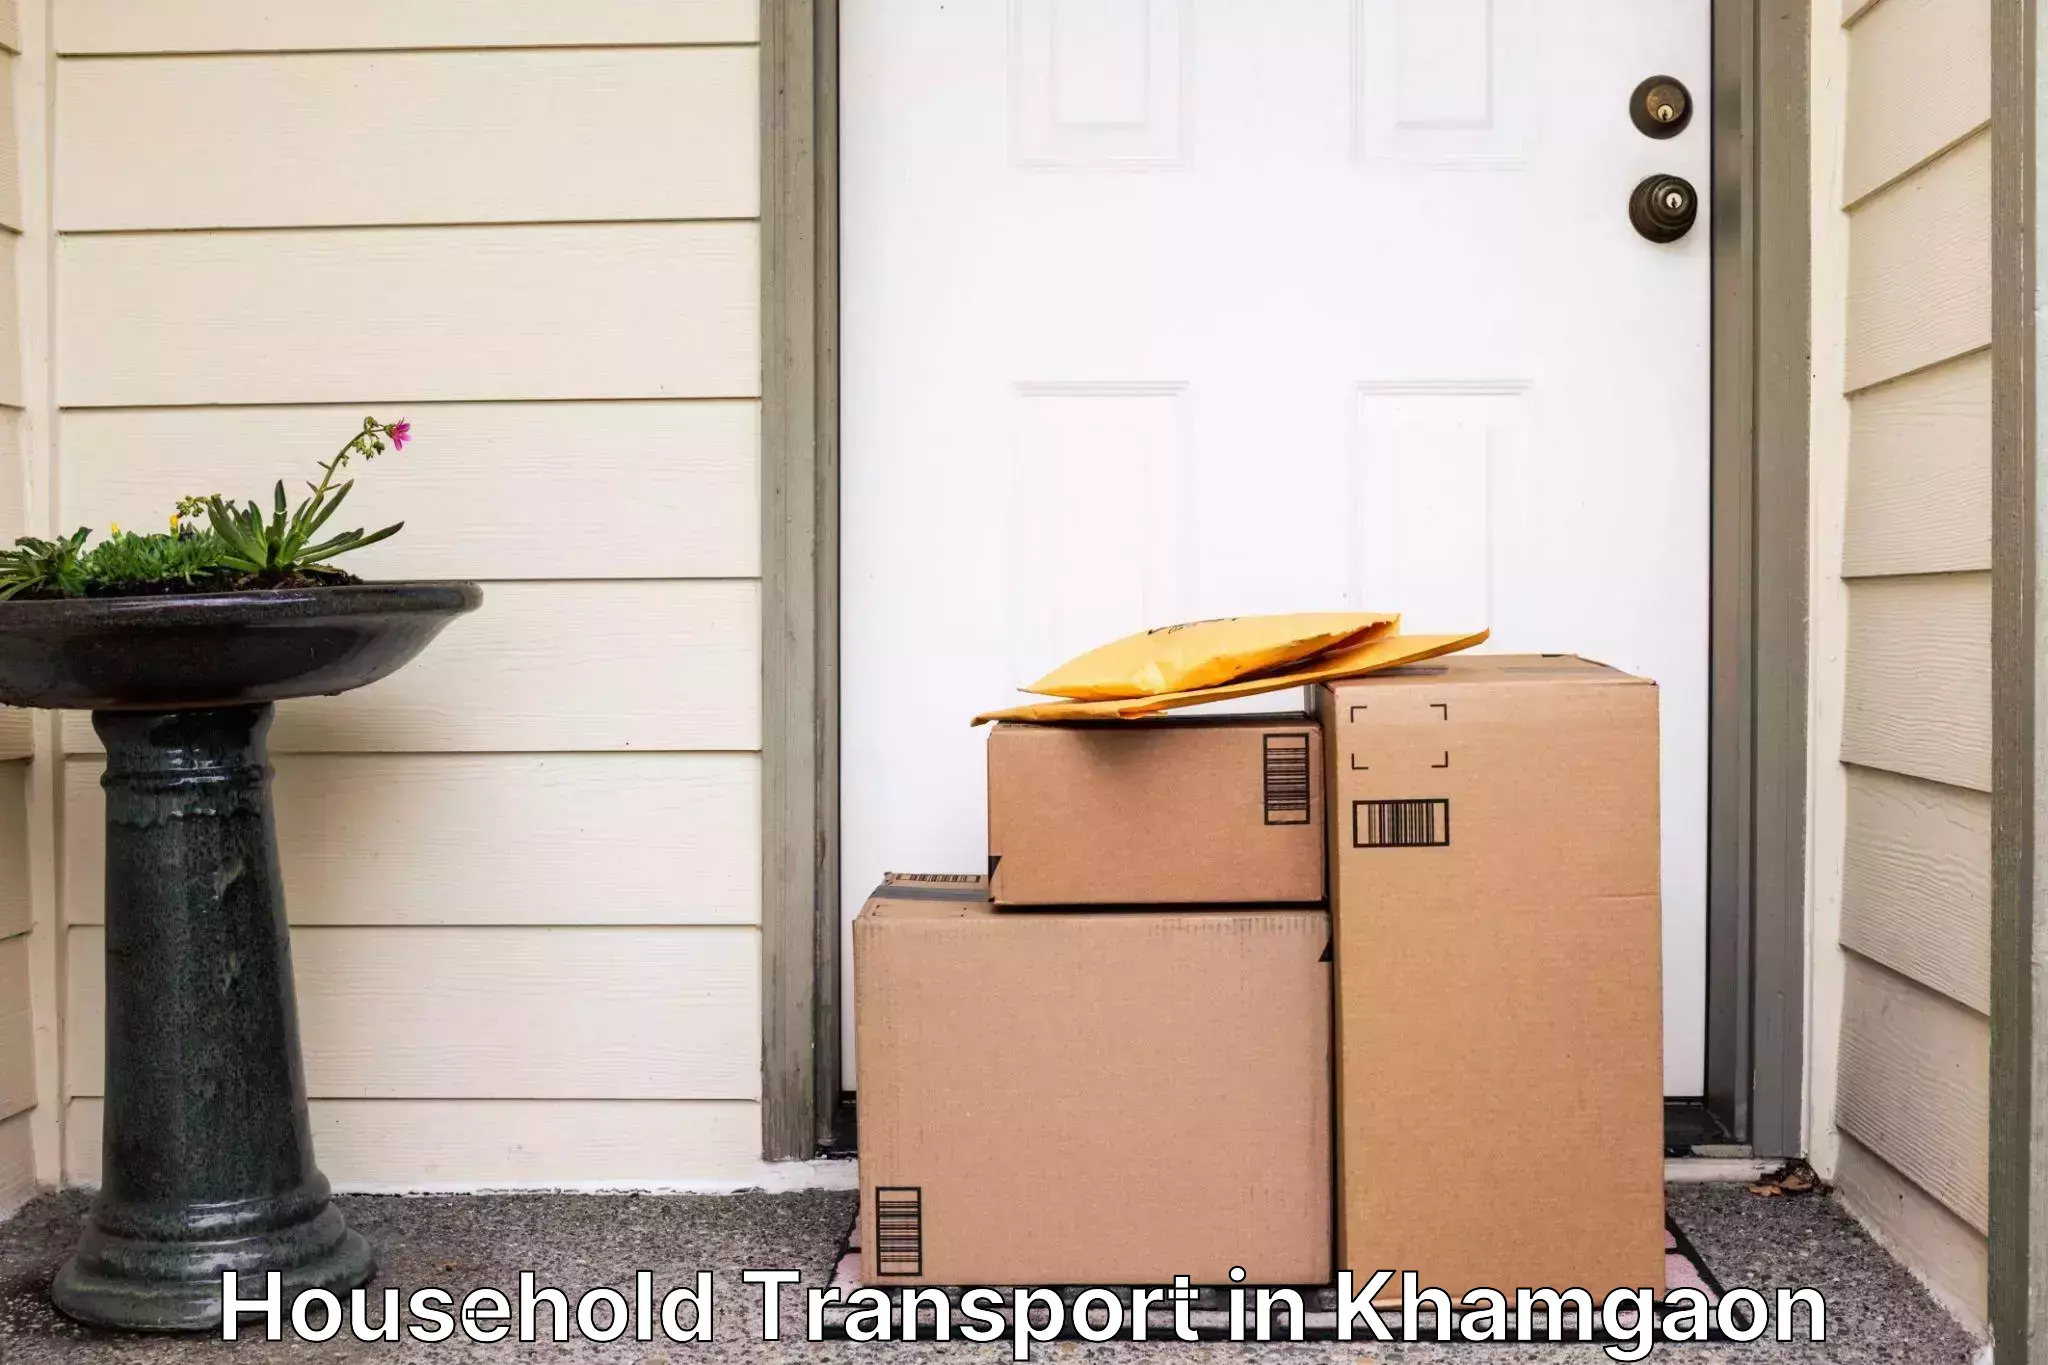 Quality relocation services in Khamgaon